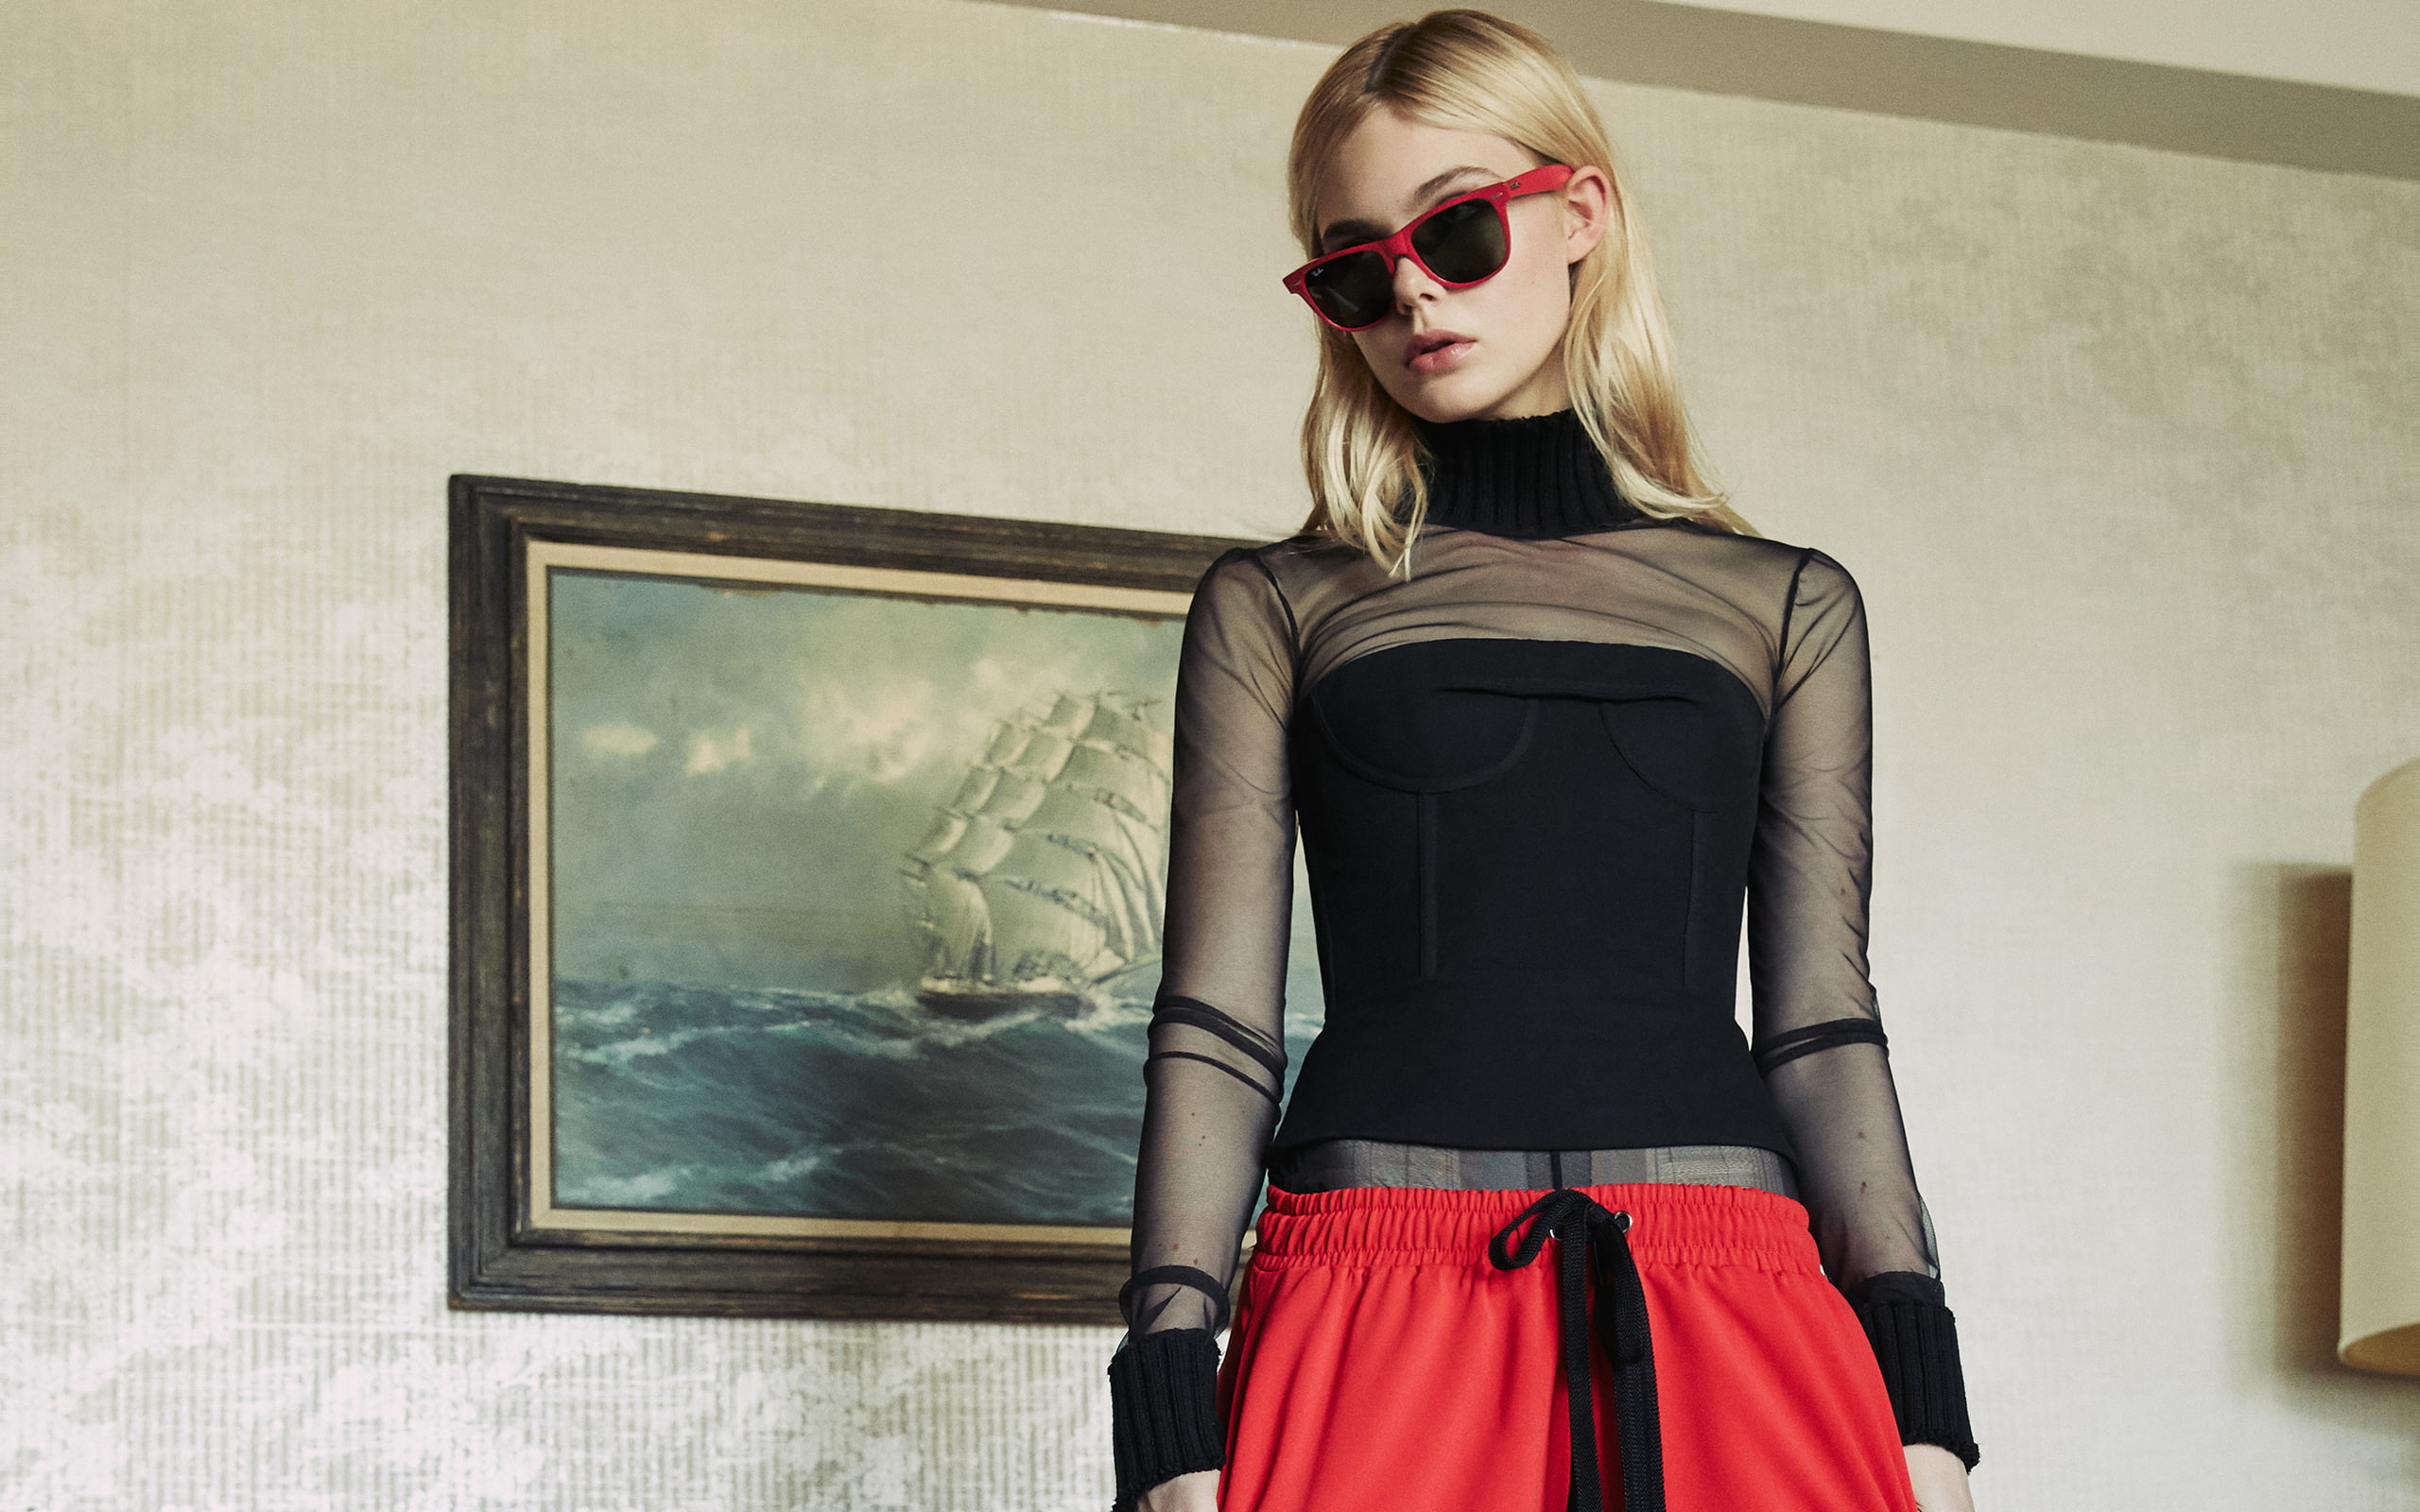 Elle Fanning, actress, sunglasses, blonde, fashion, one person